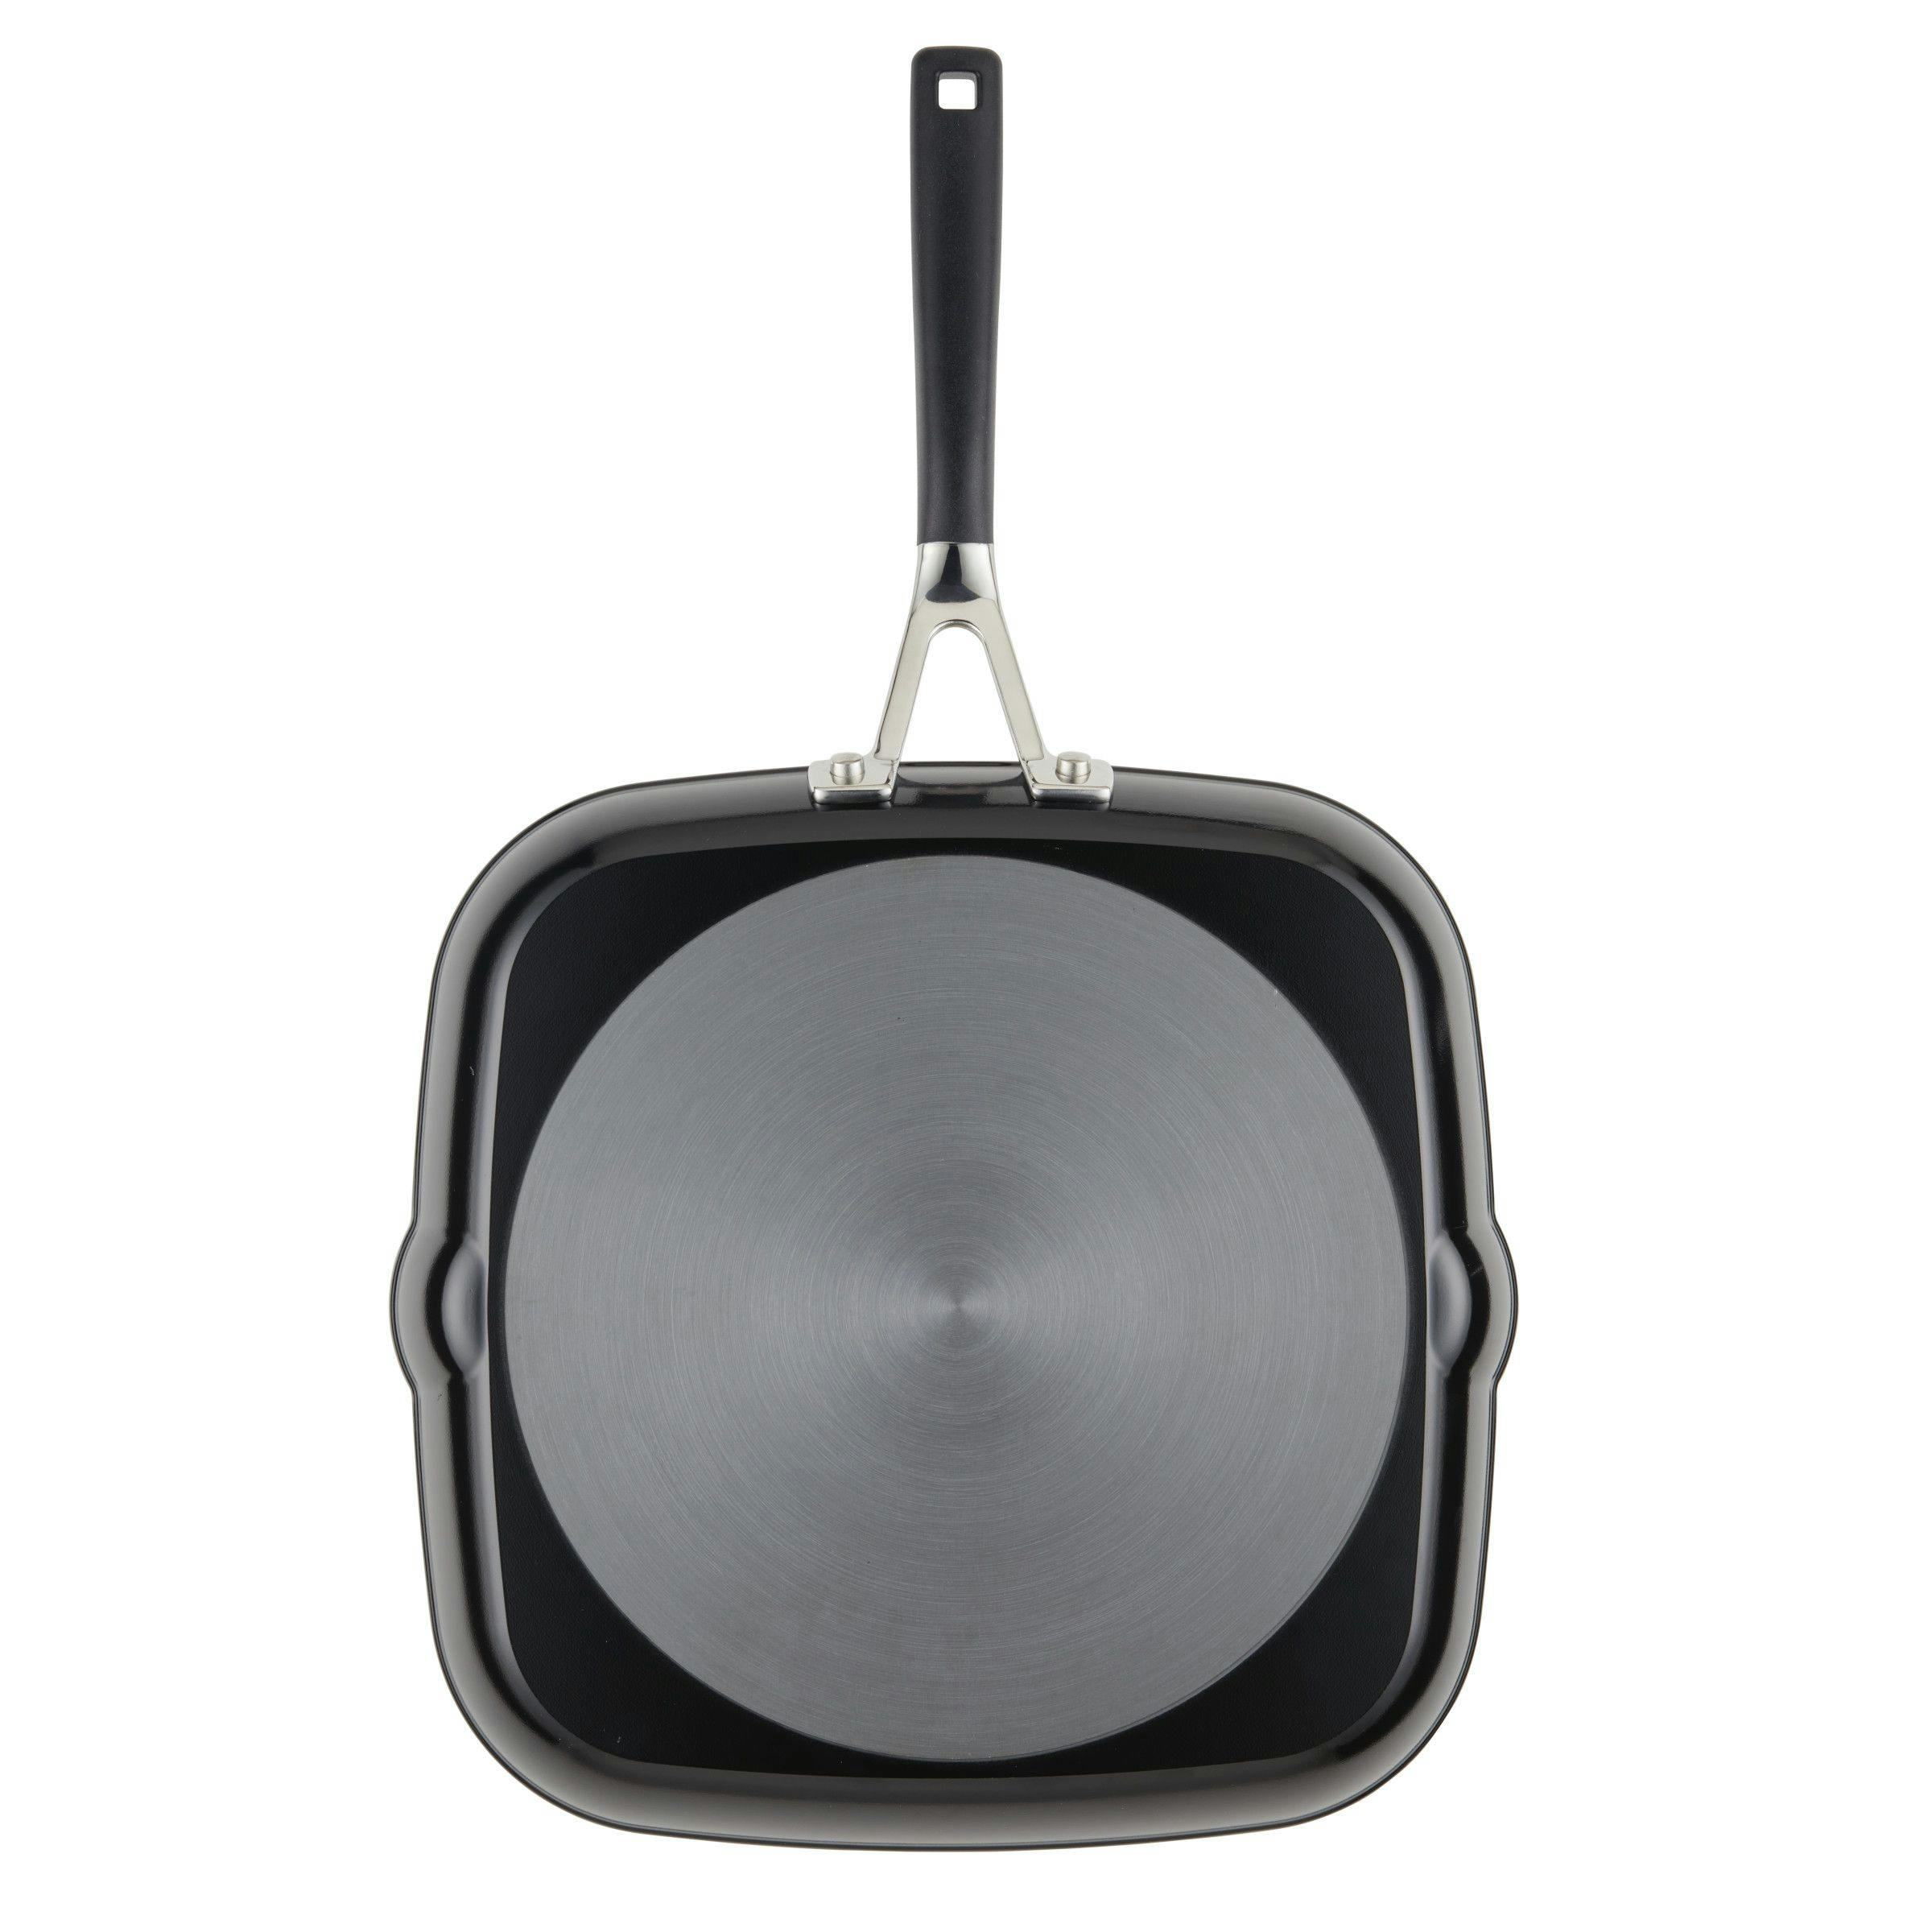 XD Nonstick Deep Square Grill Pan 11 x 11